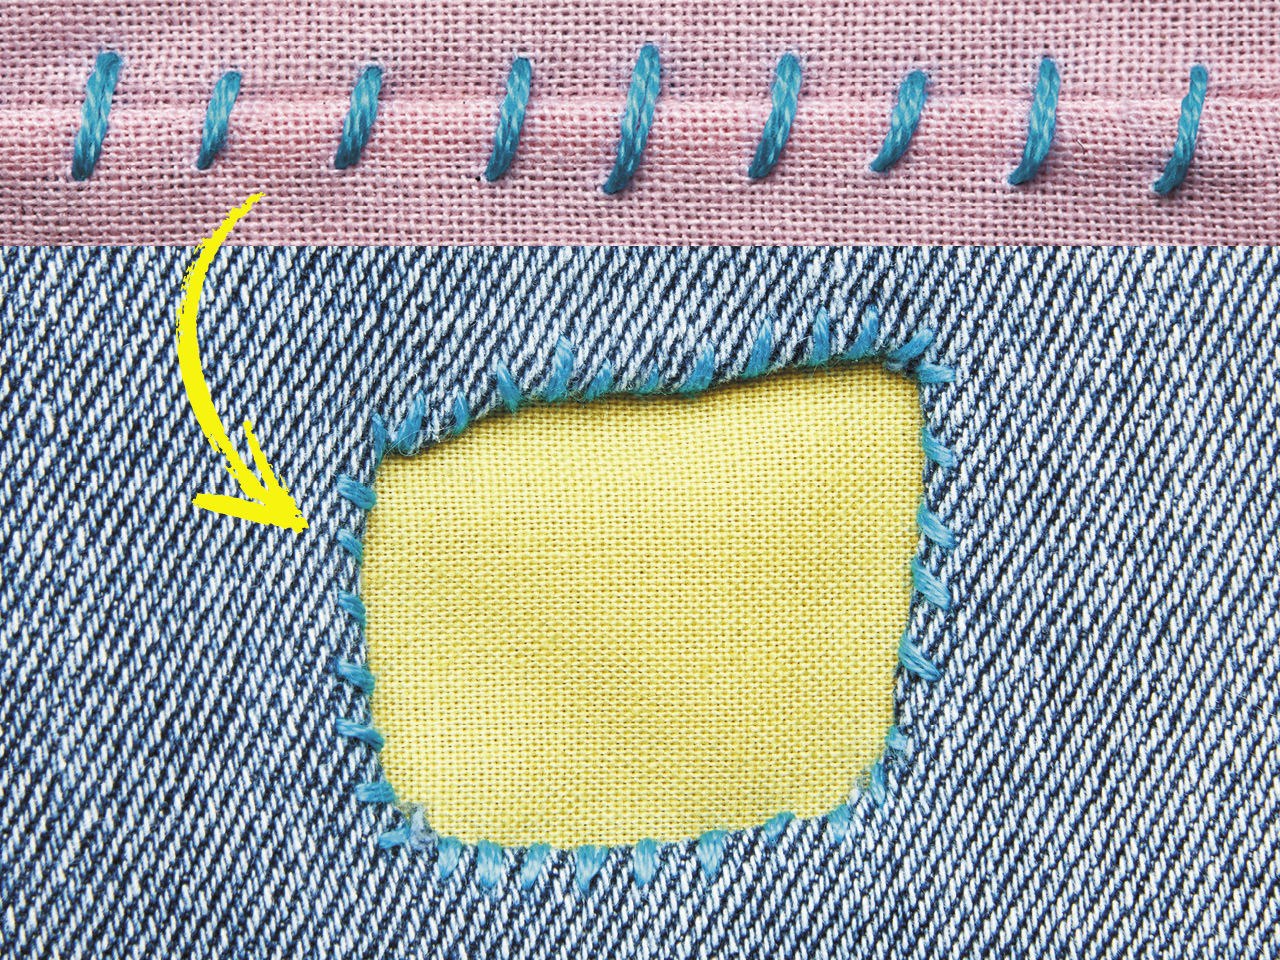 Demonstration of whip stitching with blue thread on denim and yellow fabric